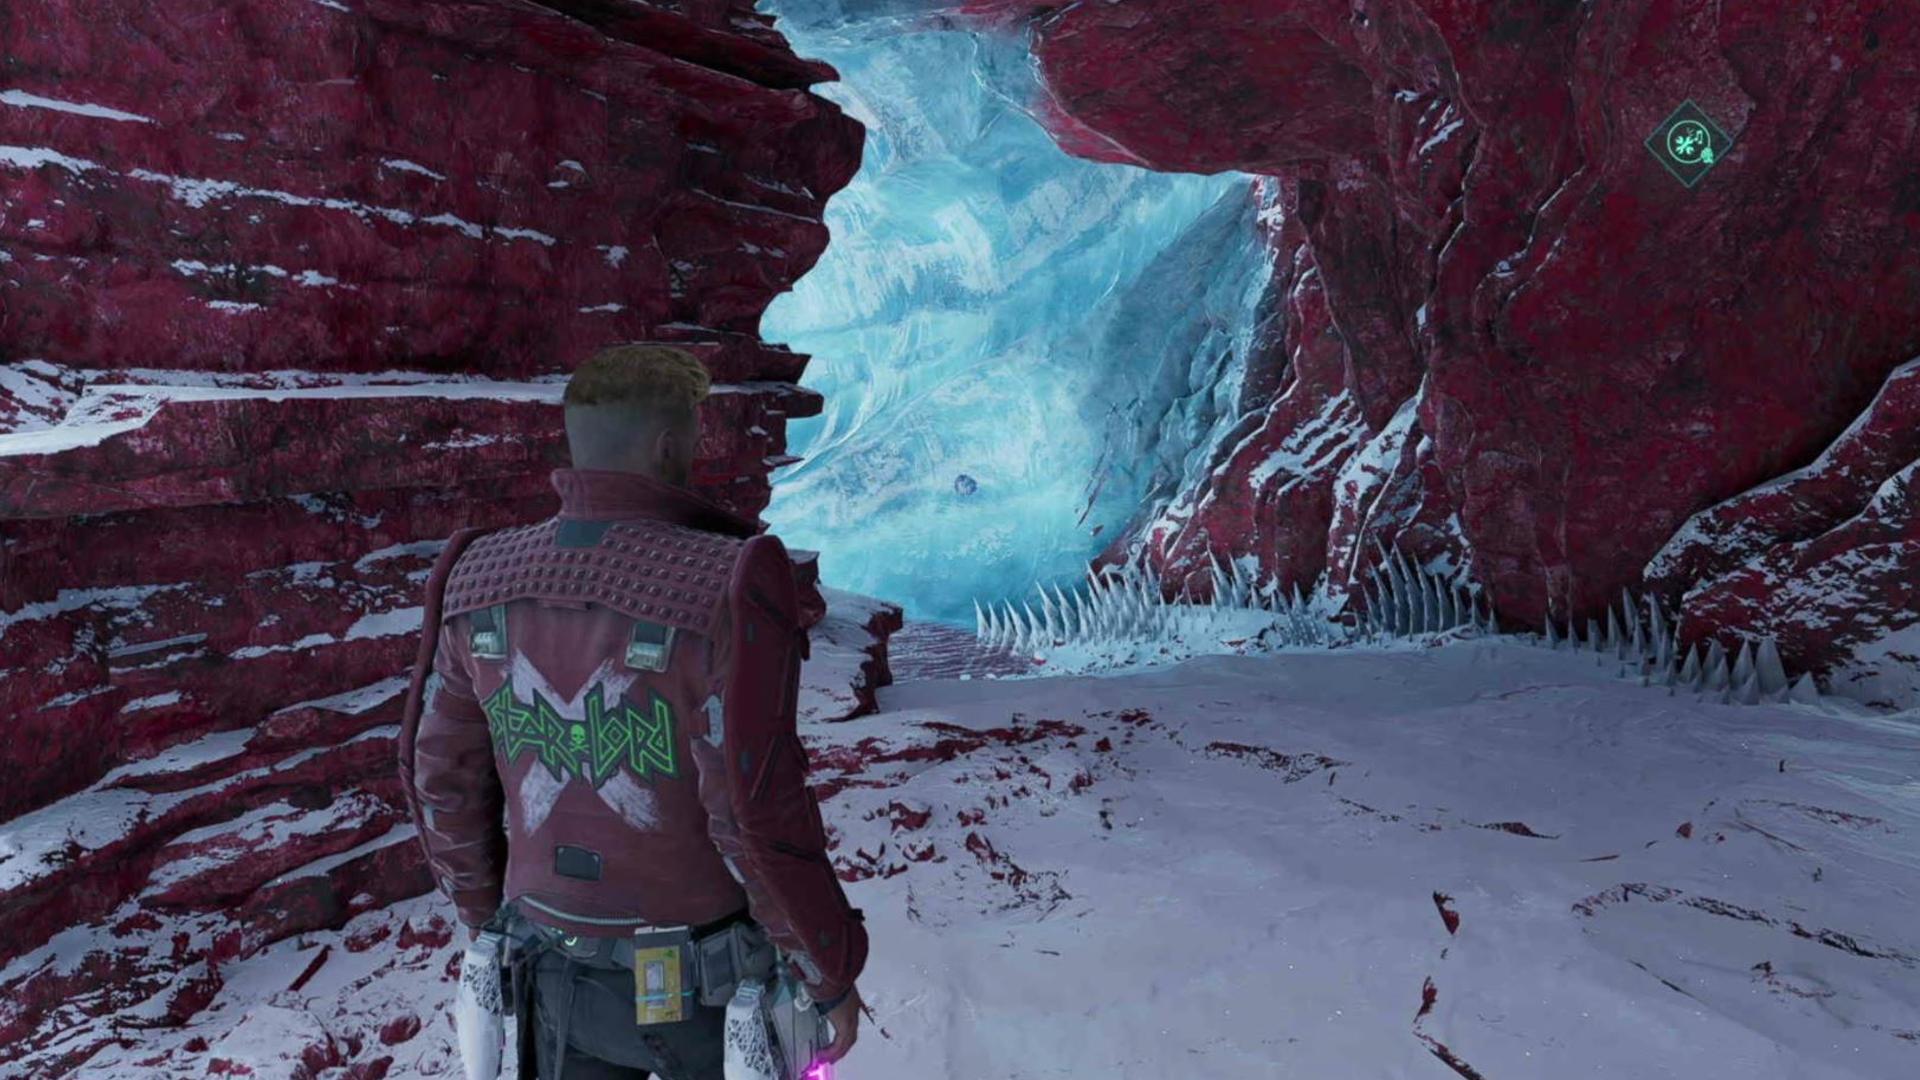 Guardians of the Galaxy outfit locations: Star-Lord can be seen looking at the ice cave ahead.